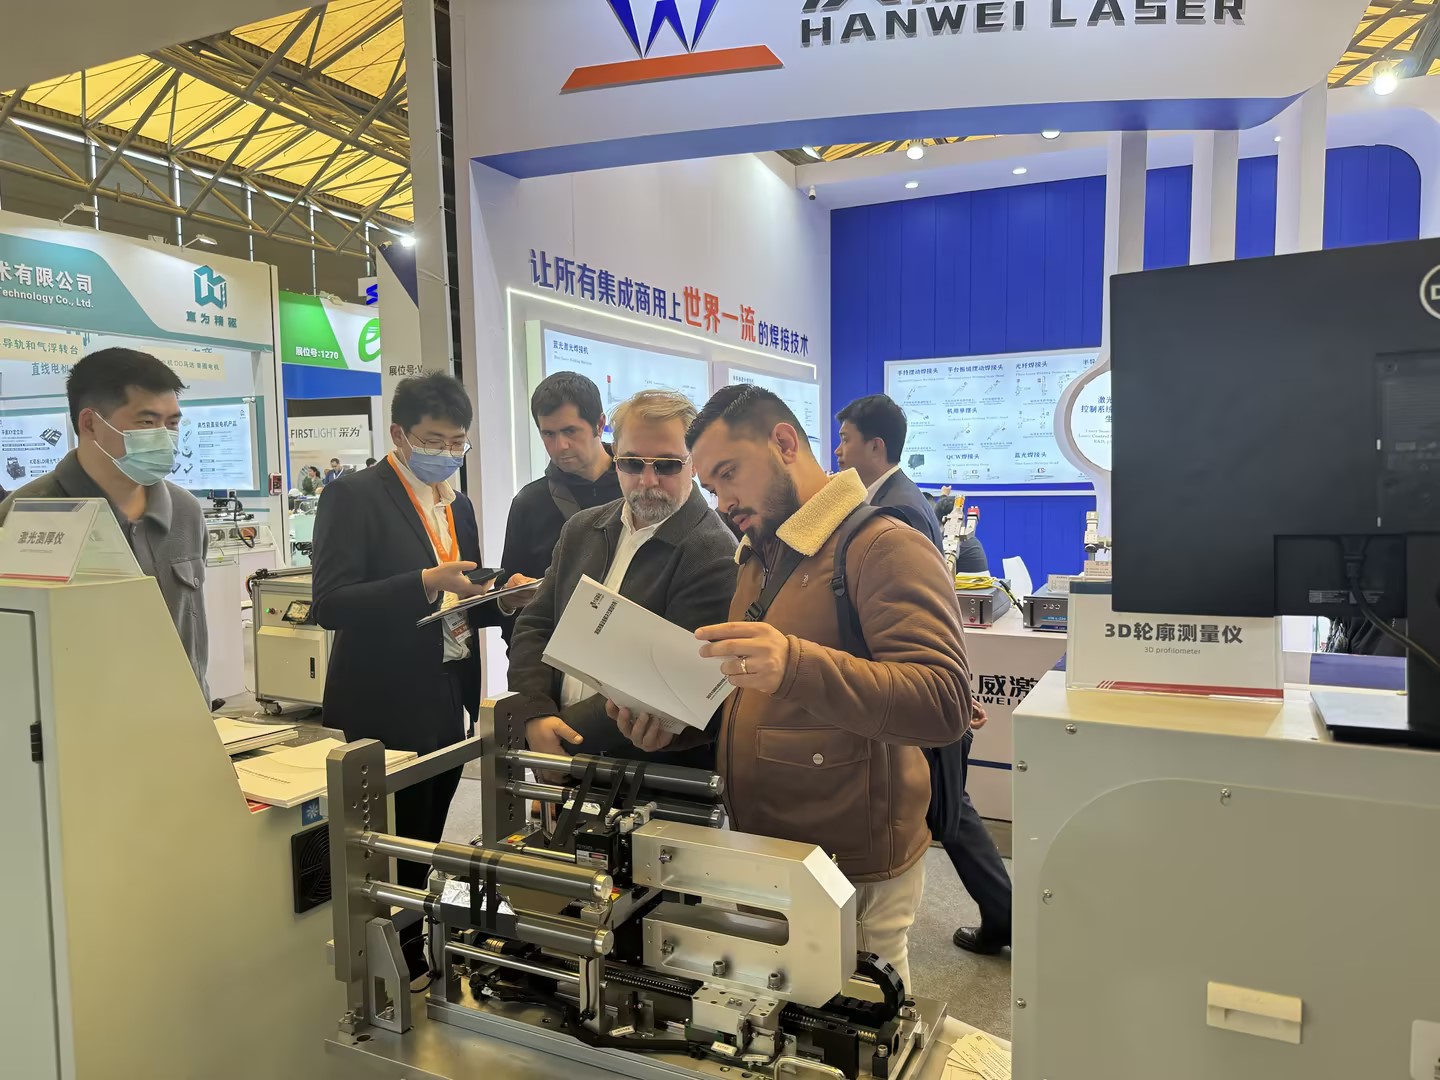 Shanghai Light Fair successfully concluded, review highlight moment of Dacheng precision!